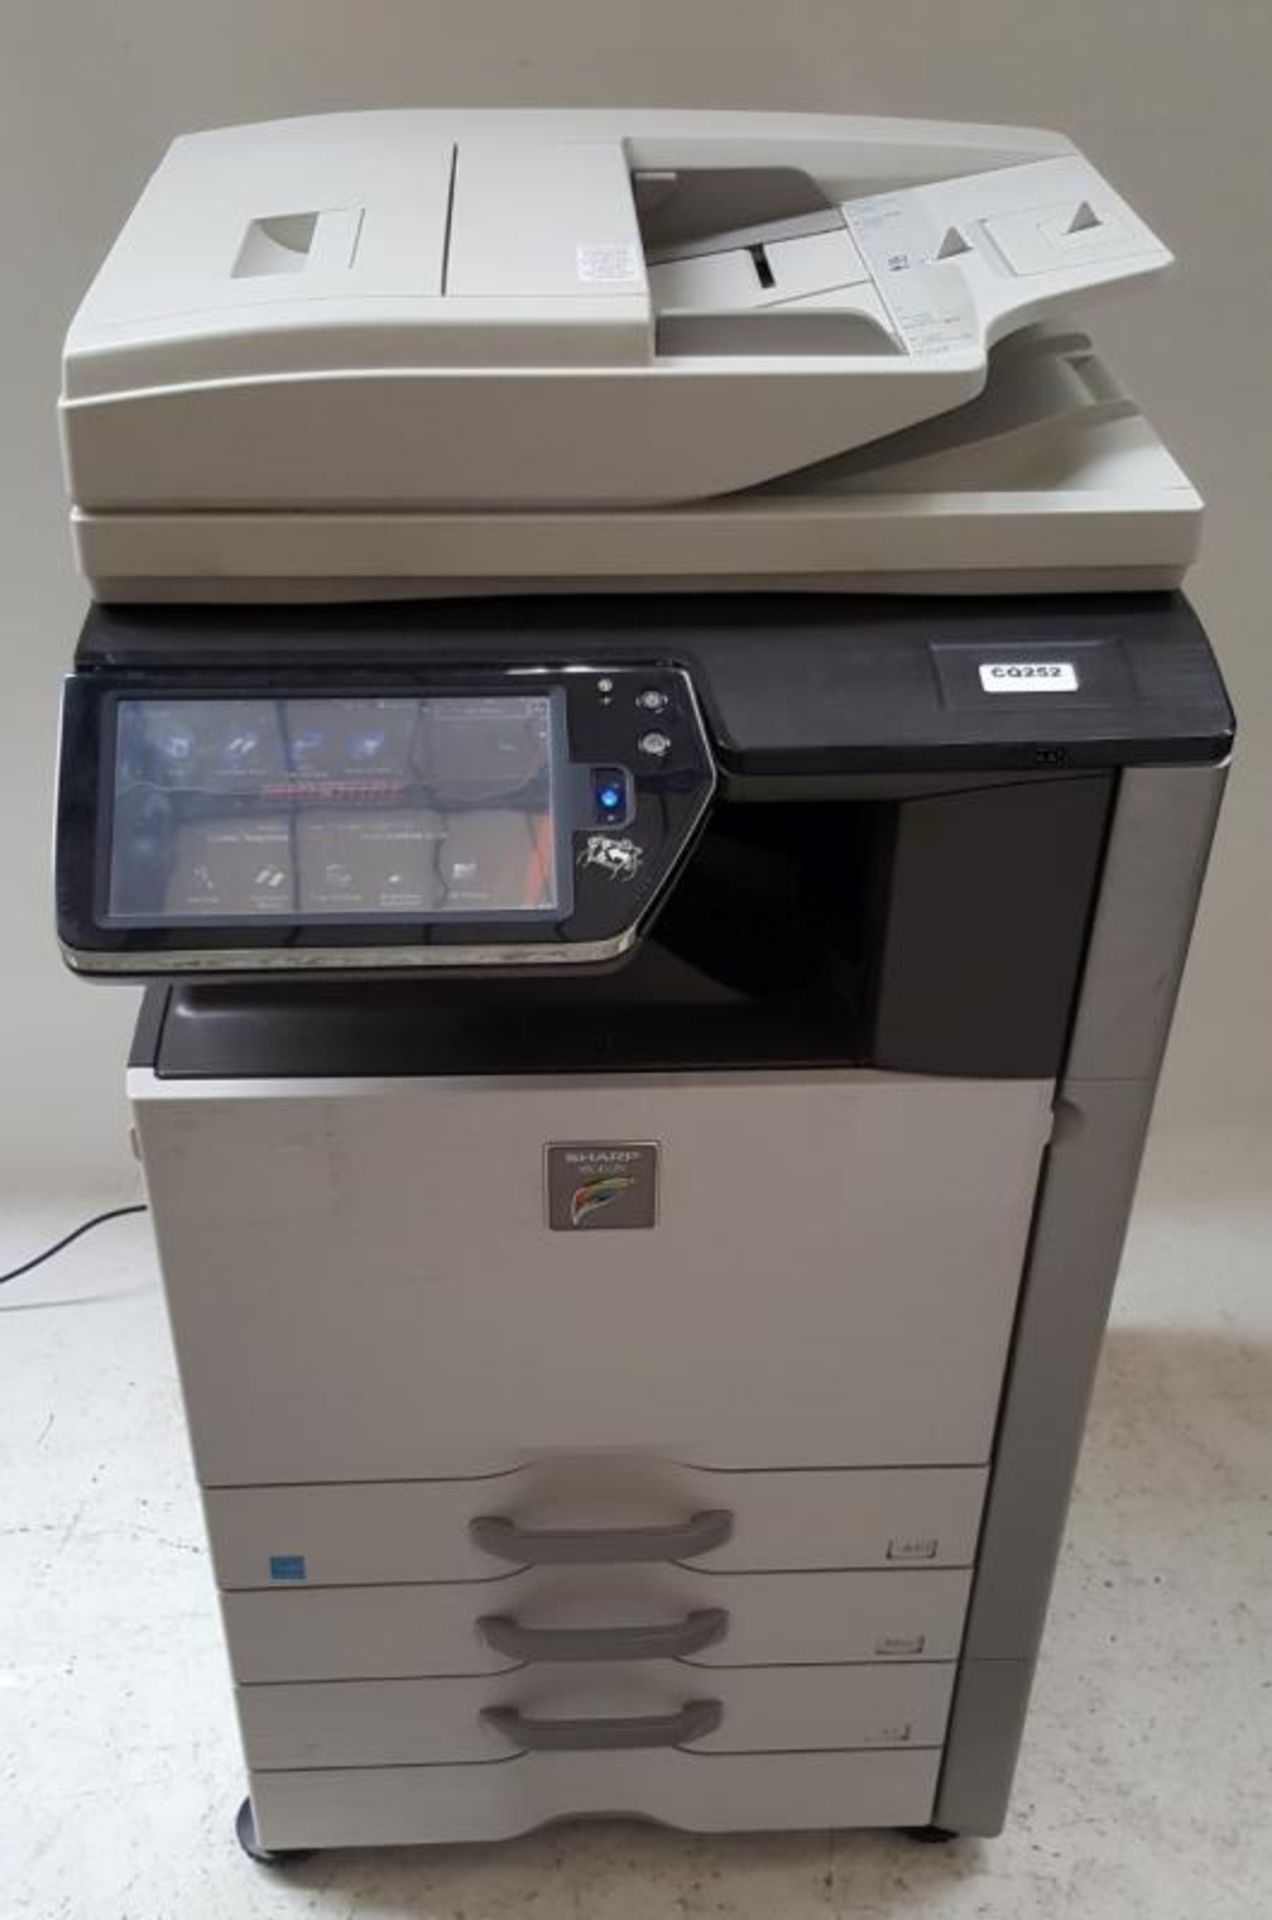 1 x Sharp MX-4112N Laser Office Printer Multifunction Device Copier Scanner (Has Come Out Of A Wor